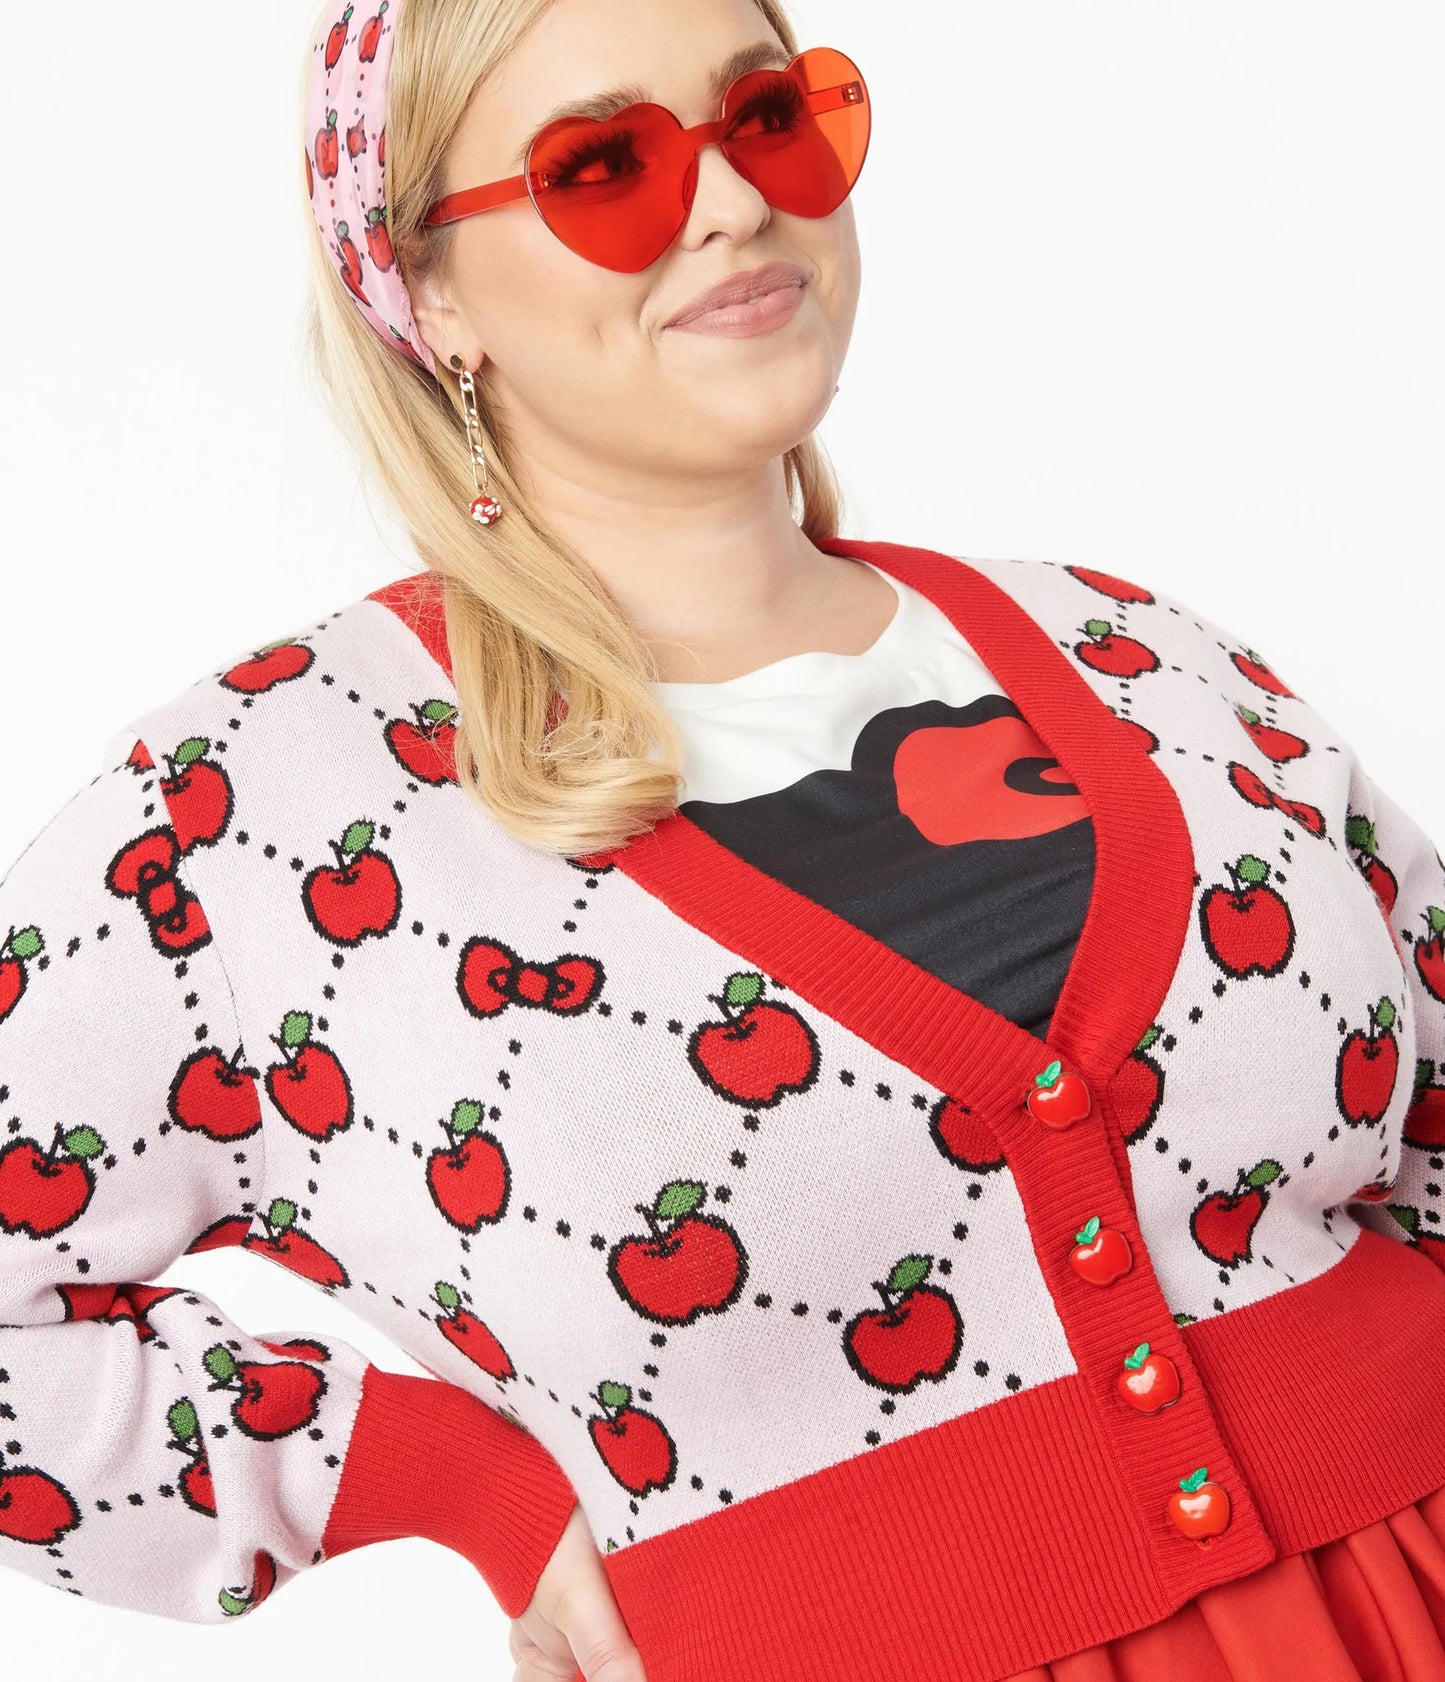 HELLO KITTY X SMAK PARLOUR PLUS SIZE PINK & RED APPLE CARDIGAN